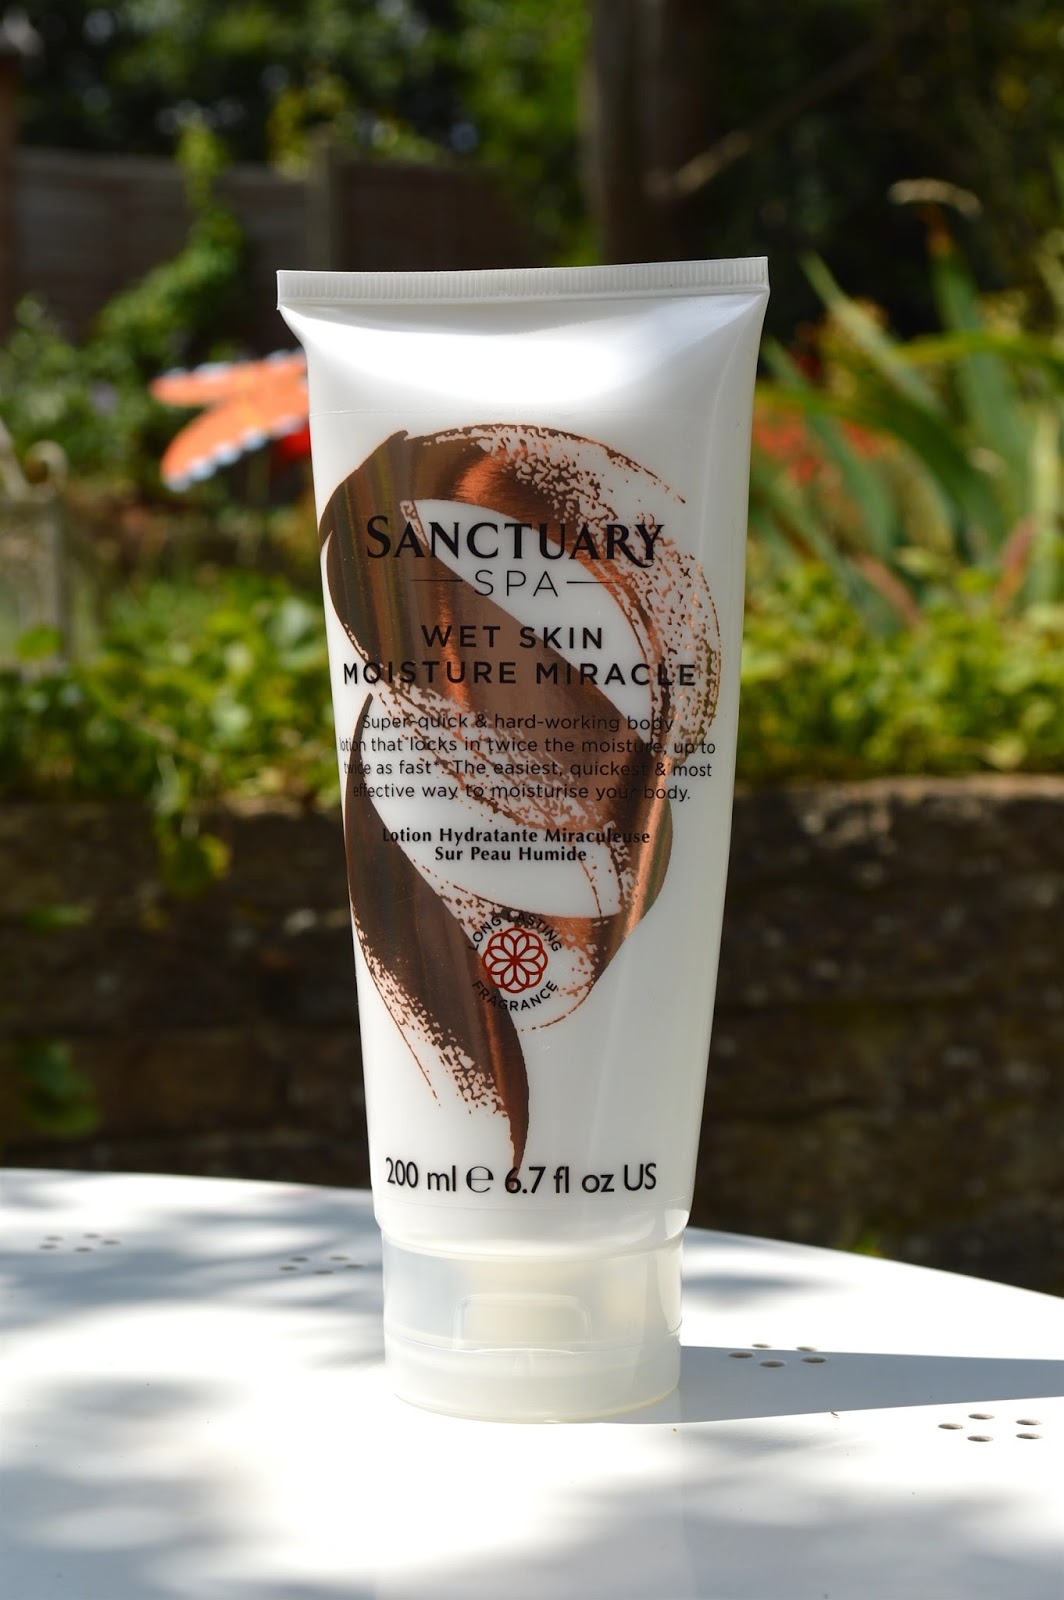 Sanctuary Spa Wet Skin Moisture Miracle Review